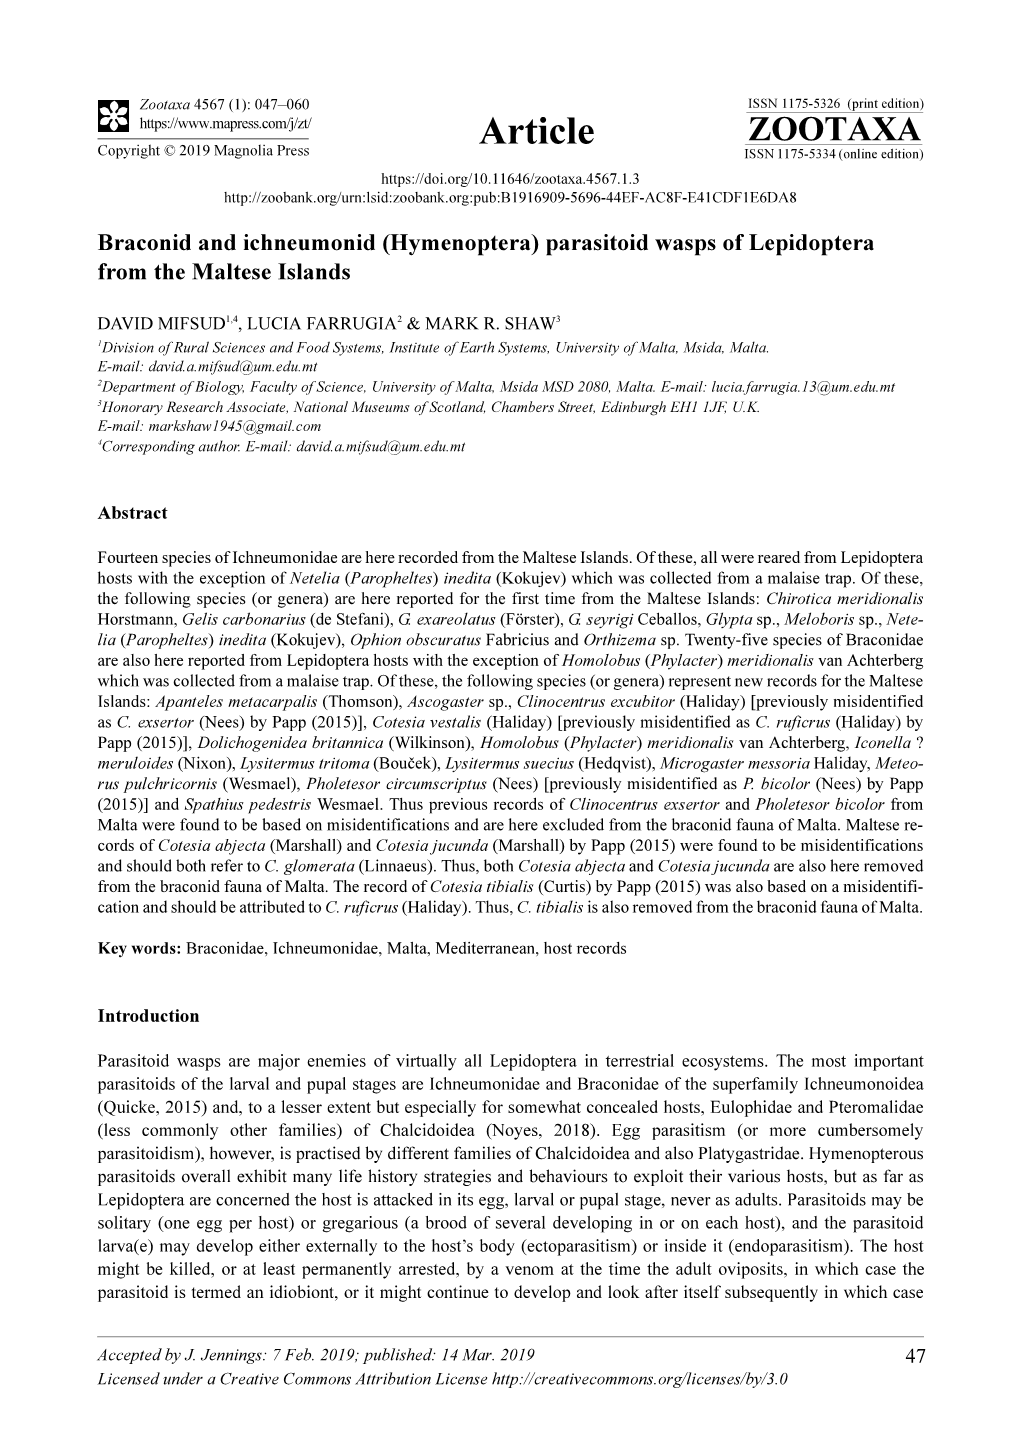 (Hymenoptera) Parasitoid Wasps of Lepidoptera from the Maltese Islands